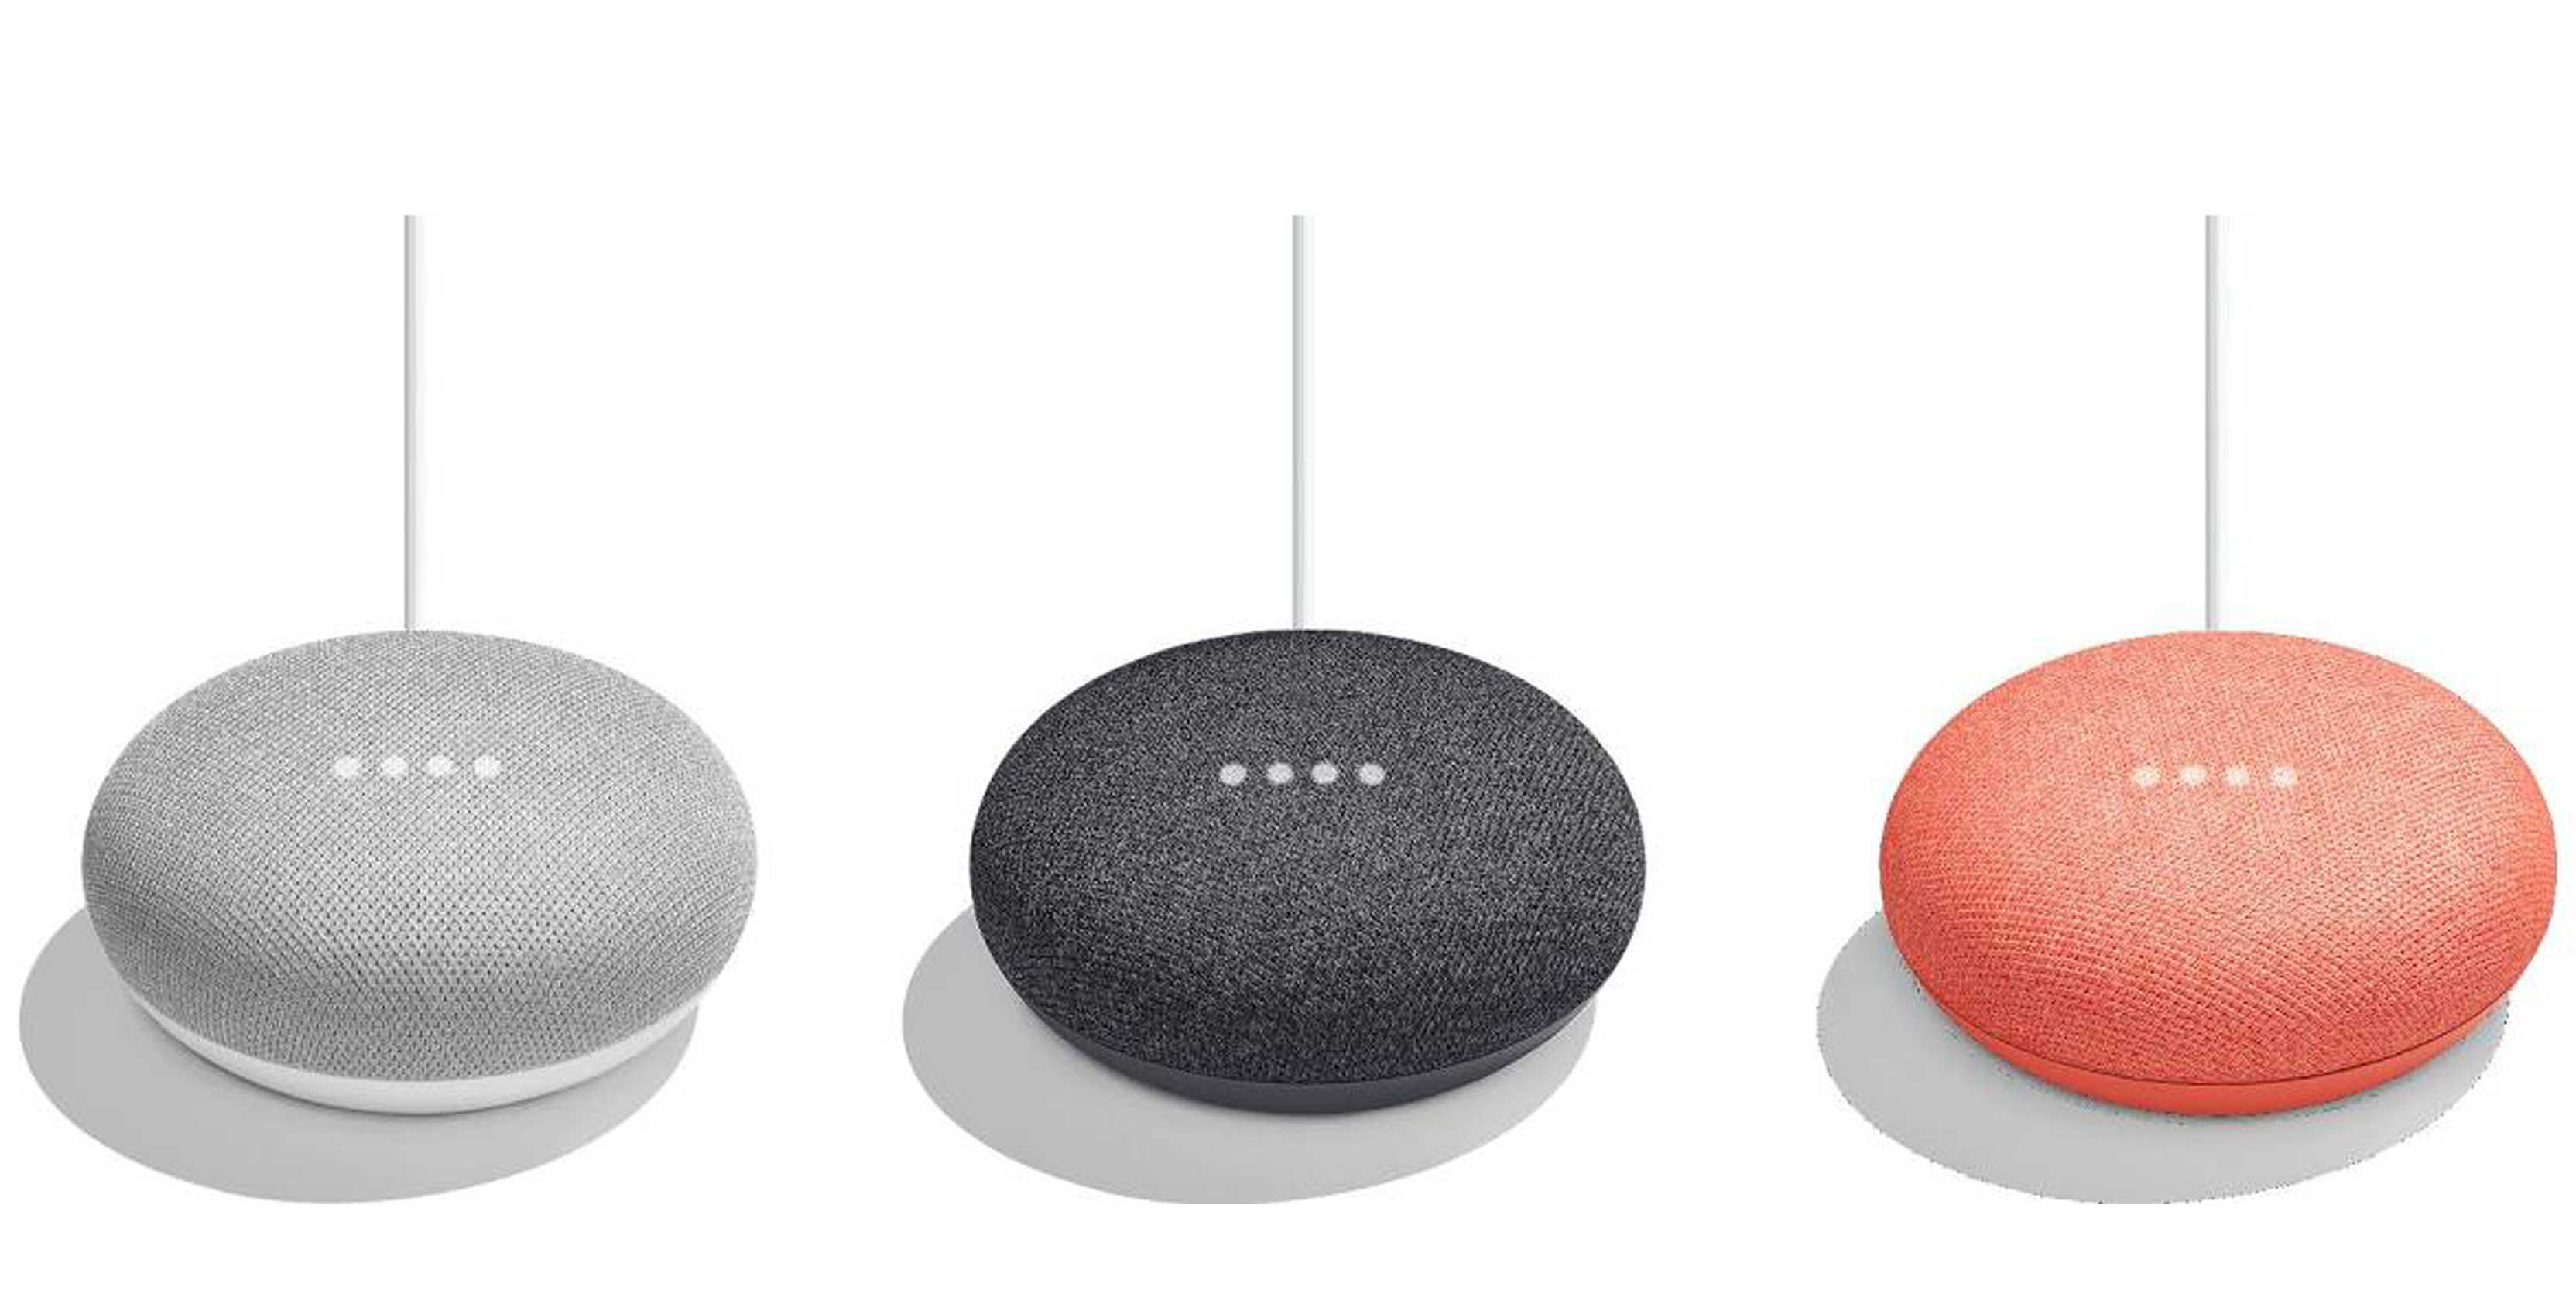 Alleged images of the leaked Google Home Mini